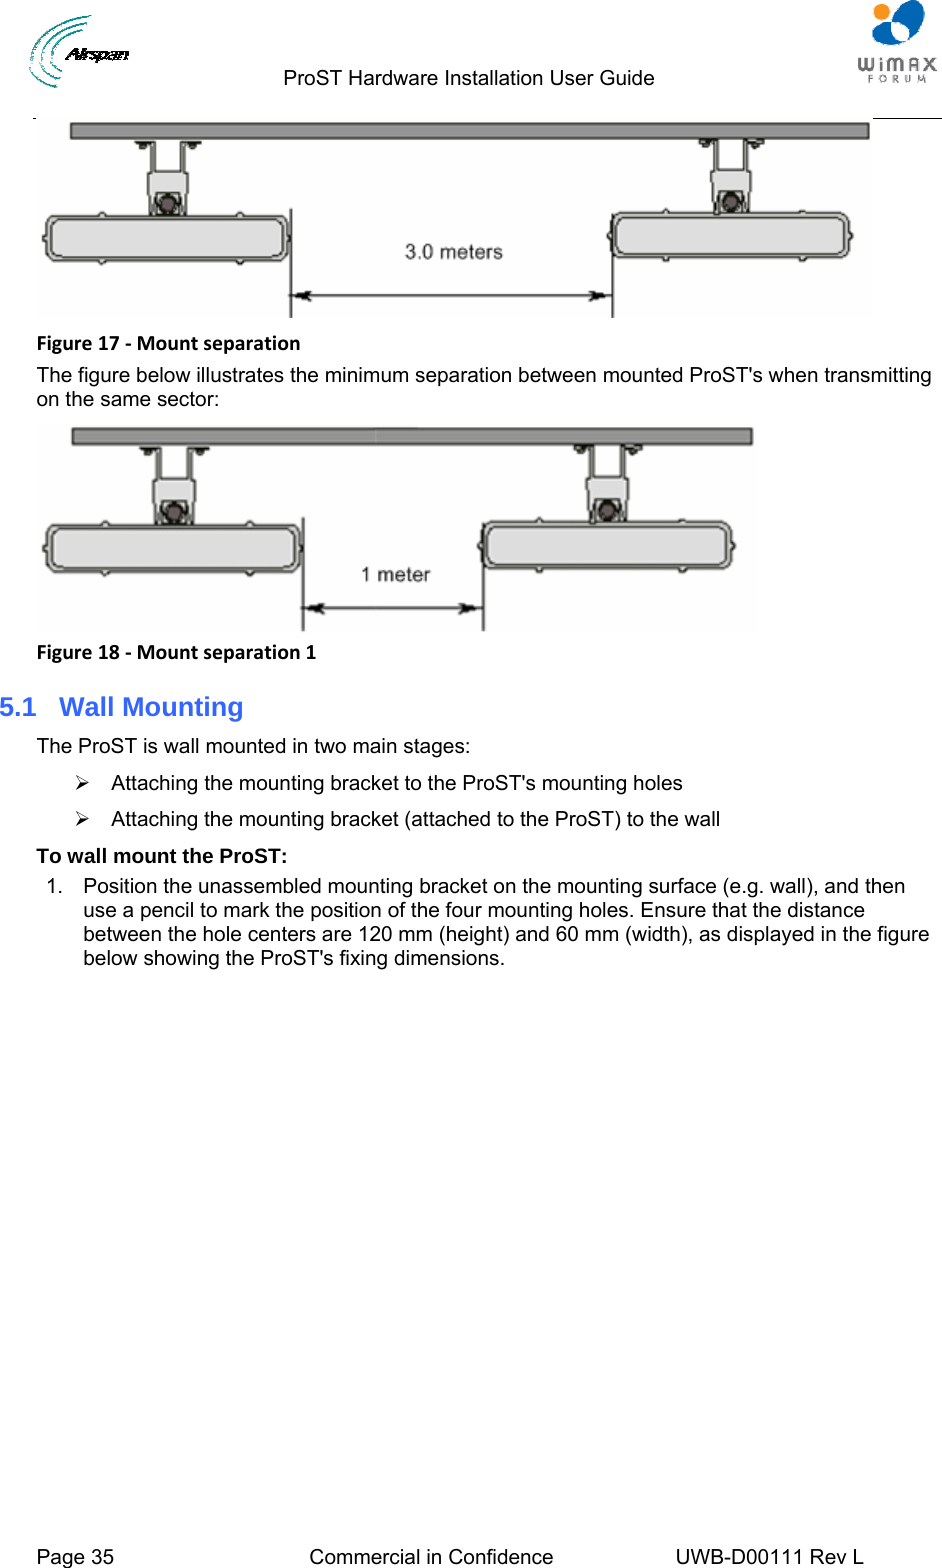                                  ProST Hardware Installation User Guide  Page 35  Commercial in Confidence  UWB-D00111 Rev L    Figure17‐MountseparationThe figure below illustrates the minimum separation between mounted ProST&apos;s when transmitting on the same sector:  Figure18‐Mountseparation15.1  Wall Mounting The ProST is wall mounted in two main stages: ¾  Attaching the mounting bracket to the ProST&apos;s mounting holes ¾  Attaching the mounting bracket (attached to the ProST) to the wall To wall mount the ProST: 1.  Position the unassembled mounting bracket on the mounting surface (e.g. wall), and then use a pencil to mark the position of the four mounting holes. Ensure that the distance between the hole centers are 120 mm (height) and 60 mm (width), as displayed in the figure below showing the ProST&apos;s fixing dimensions. 